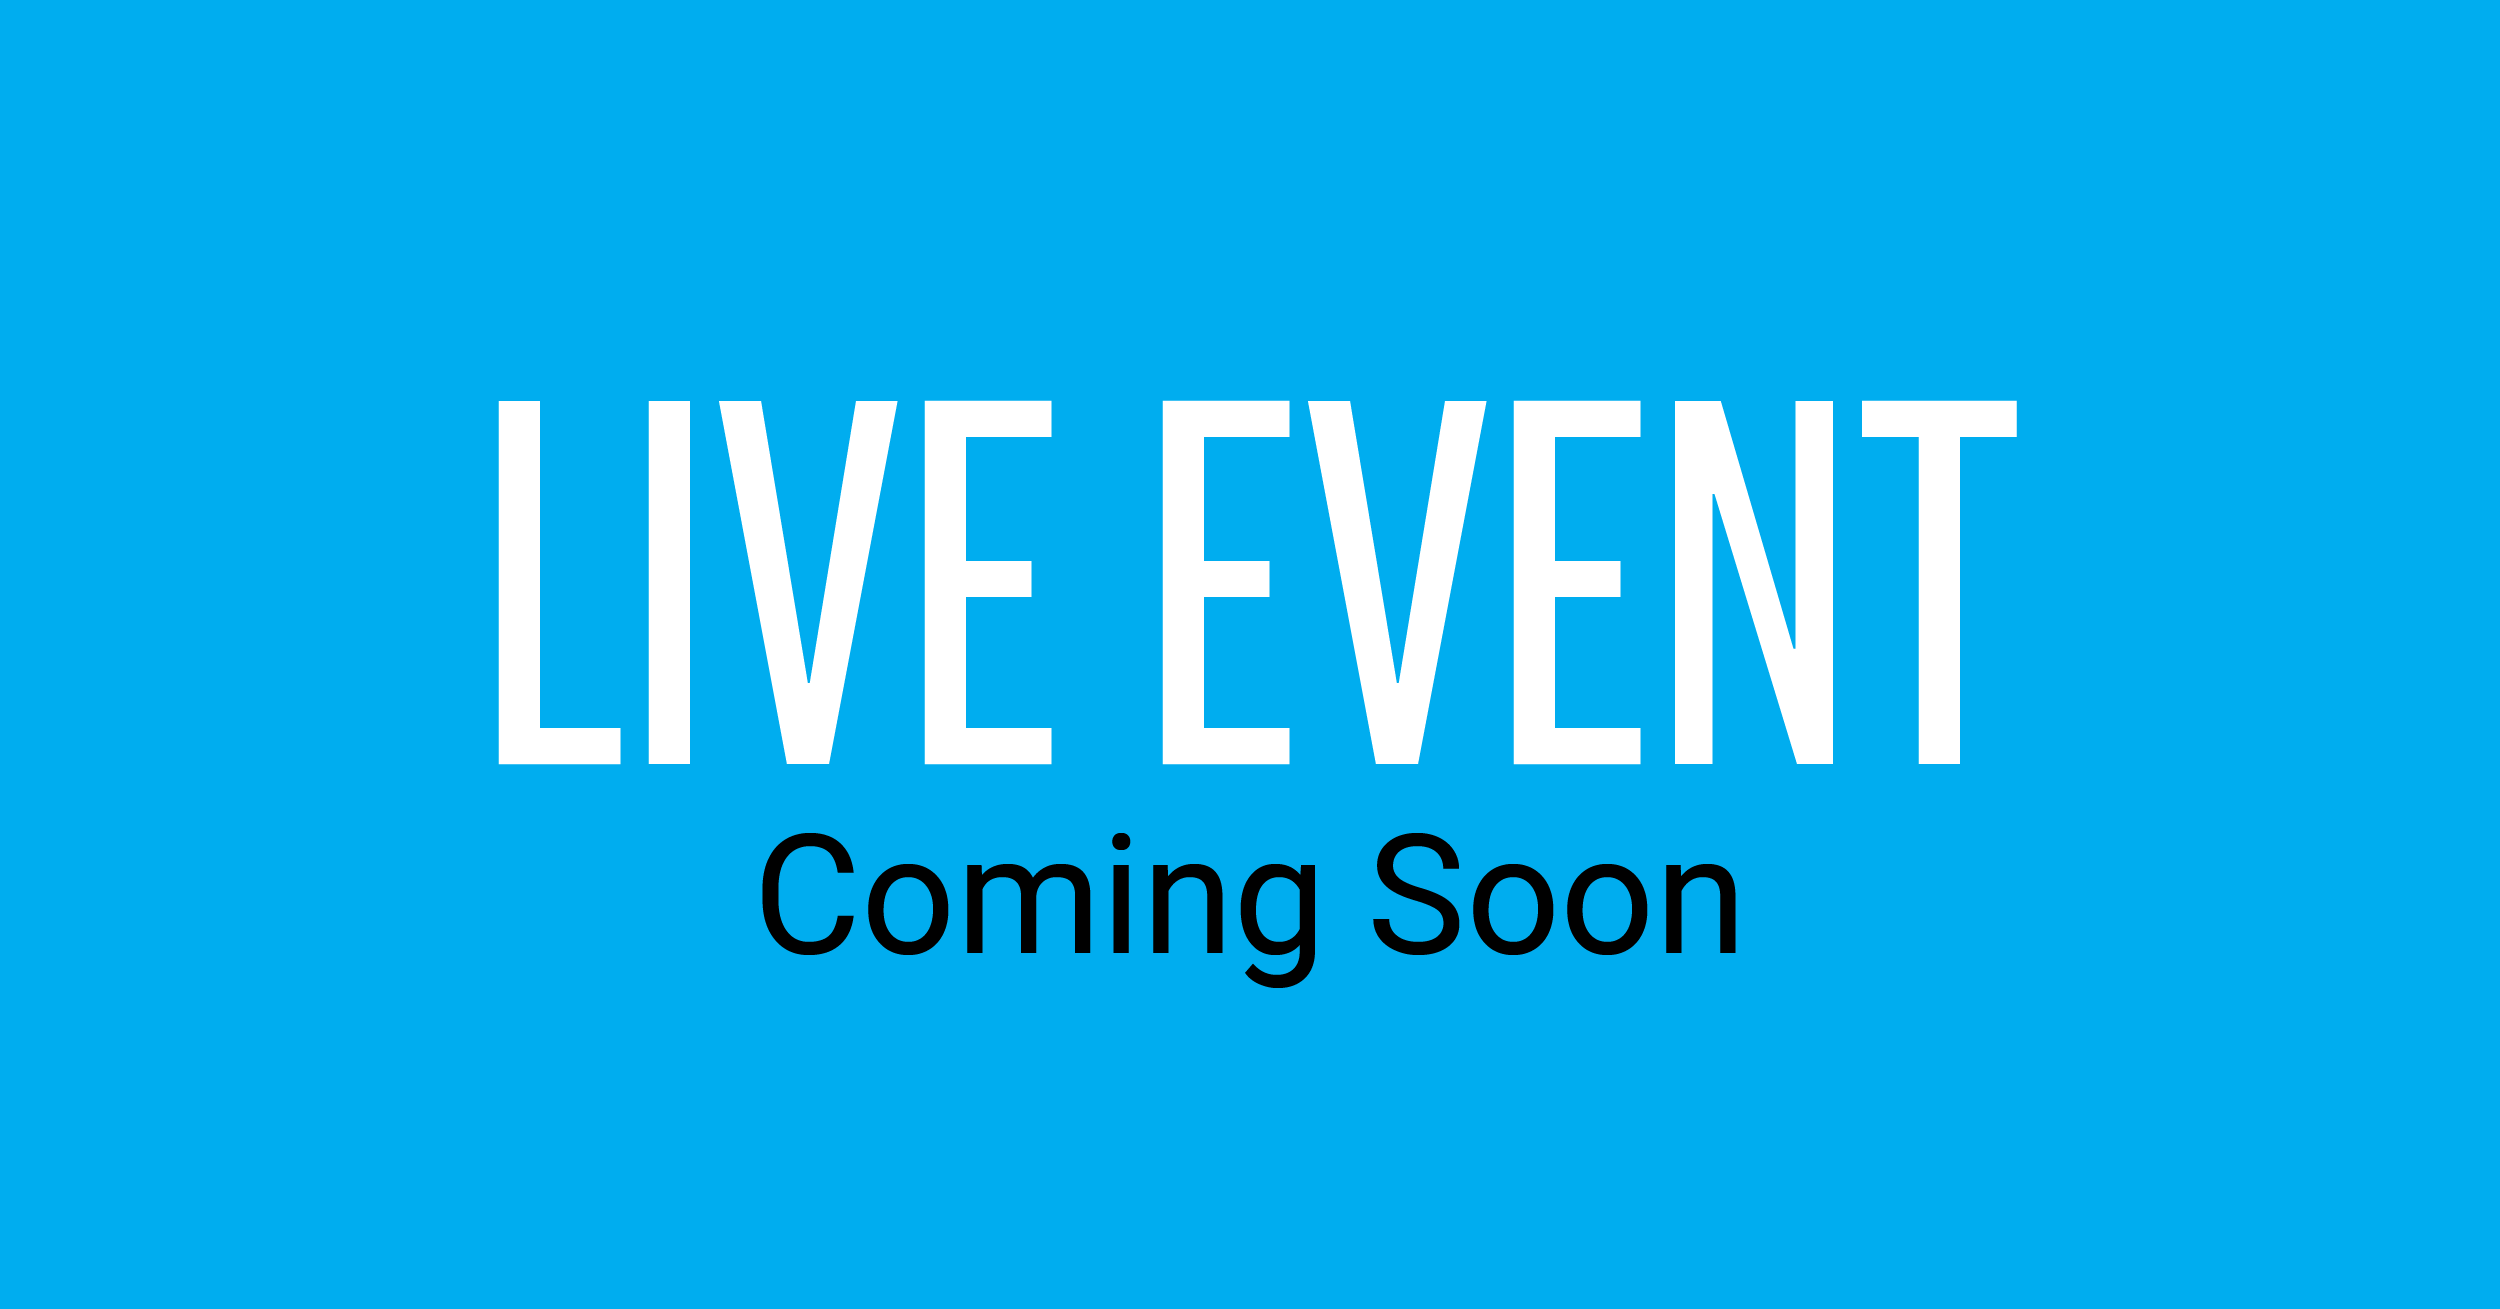 live-event-coming-soon-banner-1200x628px-04